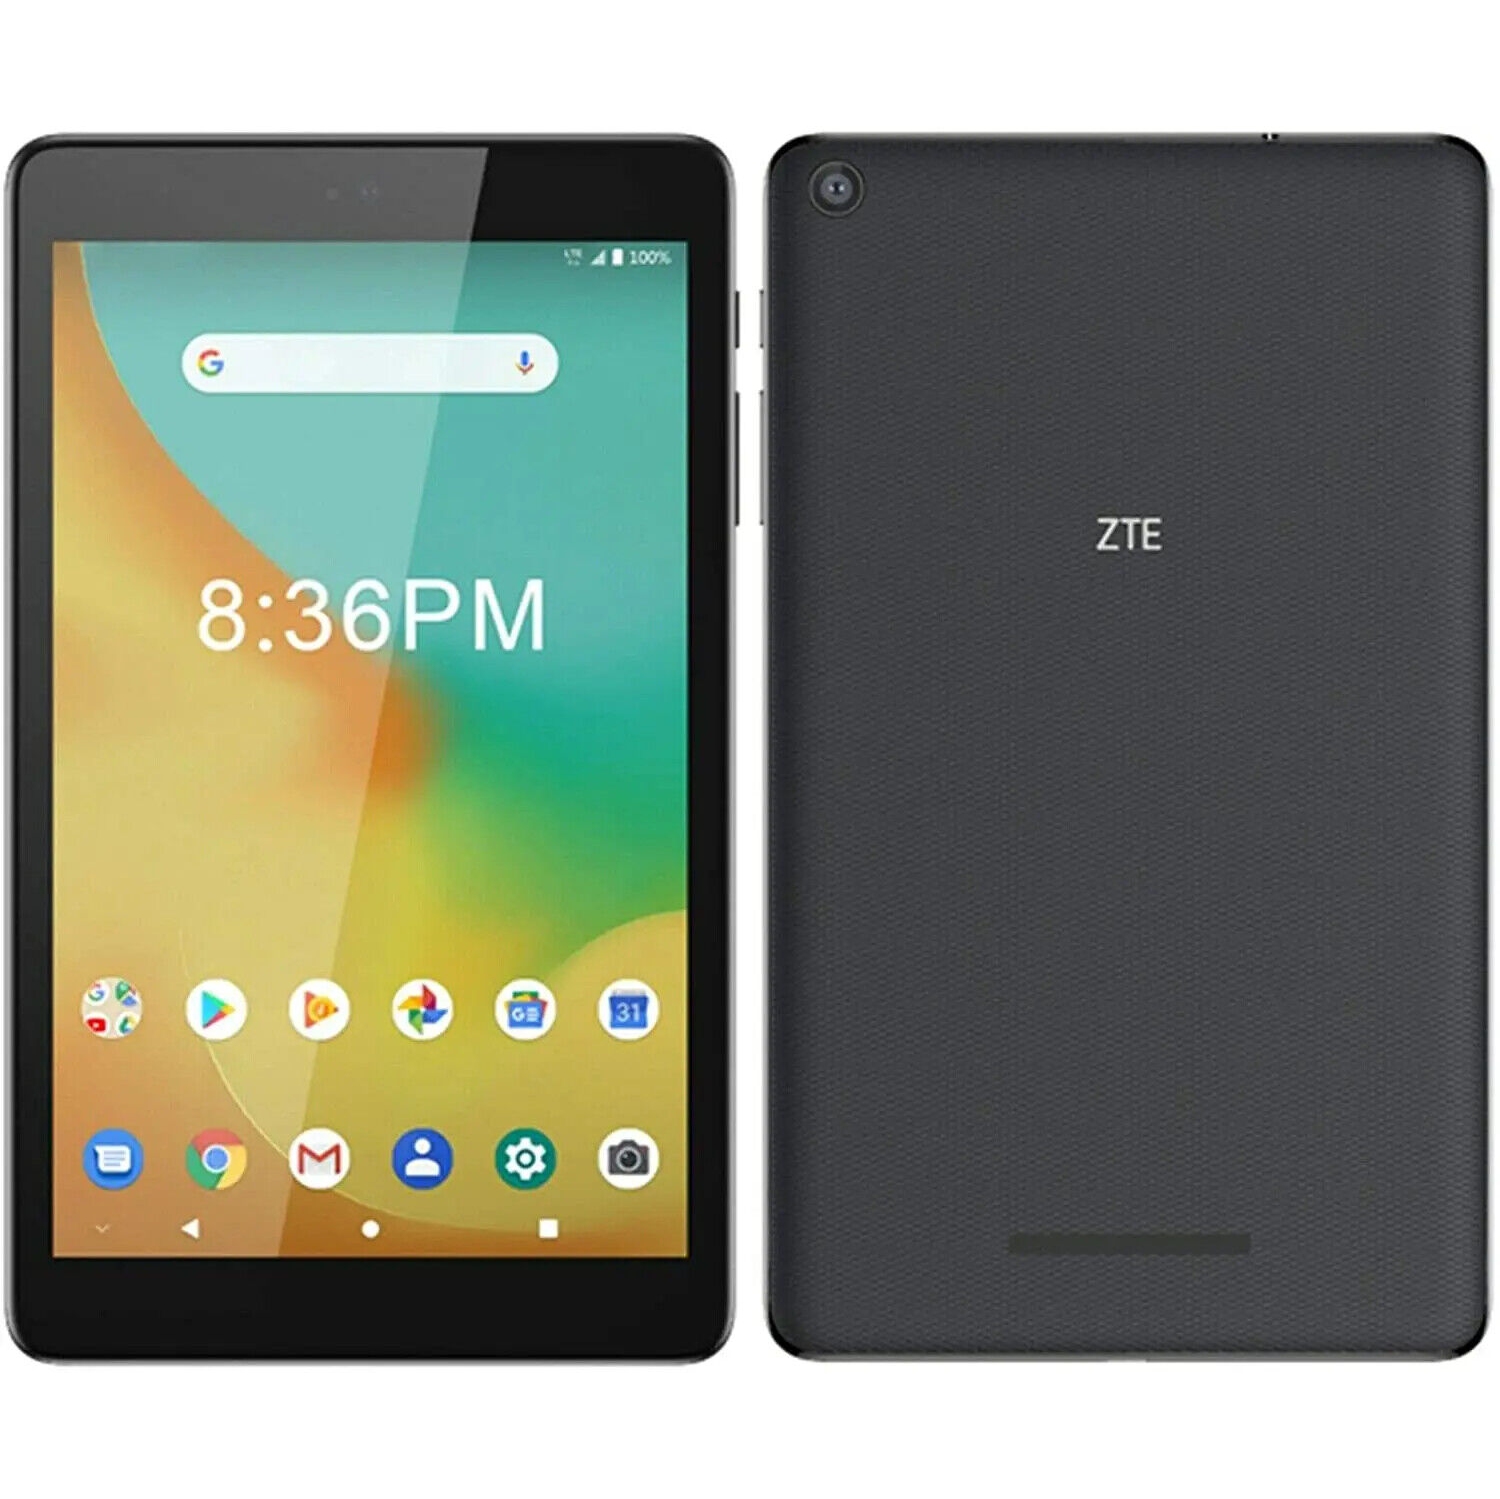 ZTE GRAND X VIEW 4_K87 8" SCREEN HD DISPLAY 4G LTE ANDROID TABLET WI-FI + CELLULAR UNLOCKED 32GB/ 1 GB _ BRAND NEW